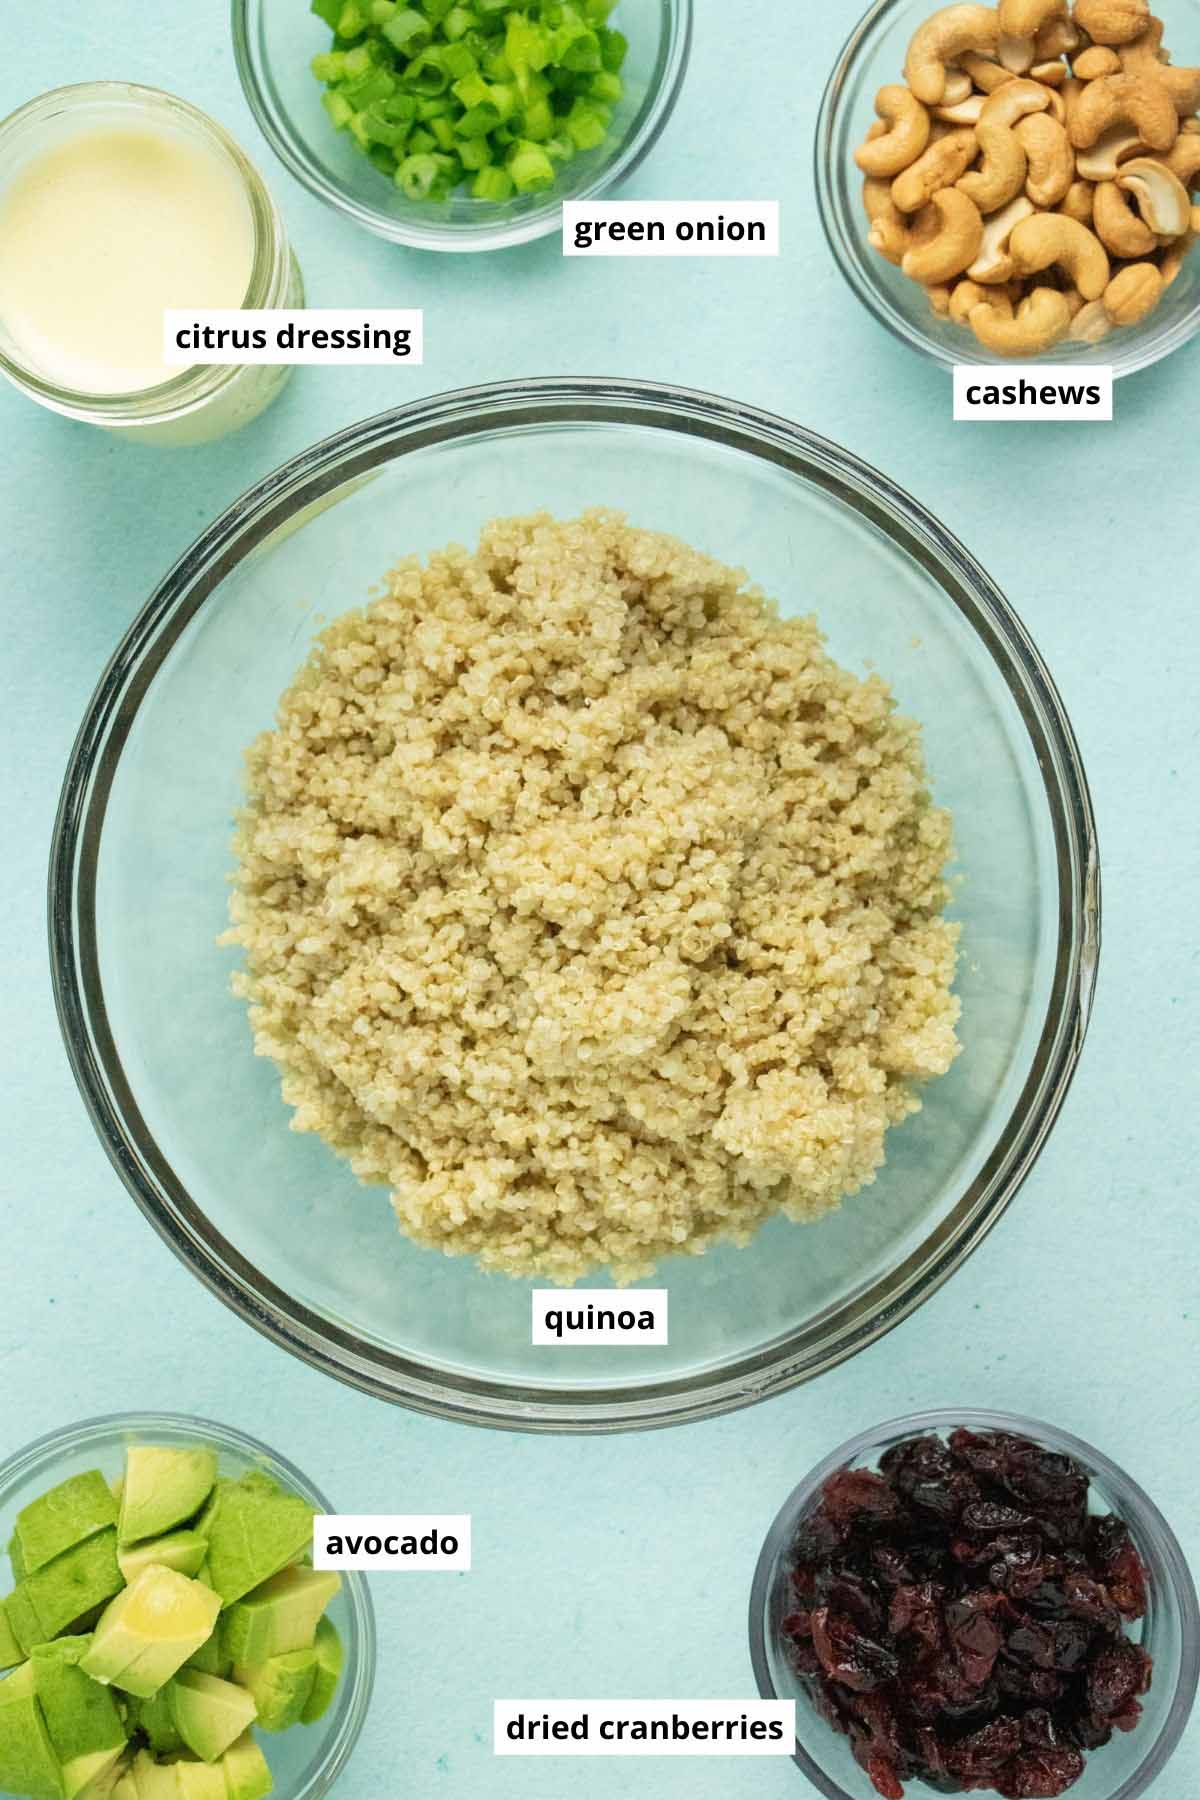 cooked quinoa, citrus dressing, and other salad ingredients in cups and bowls on blue table